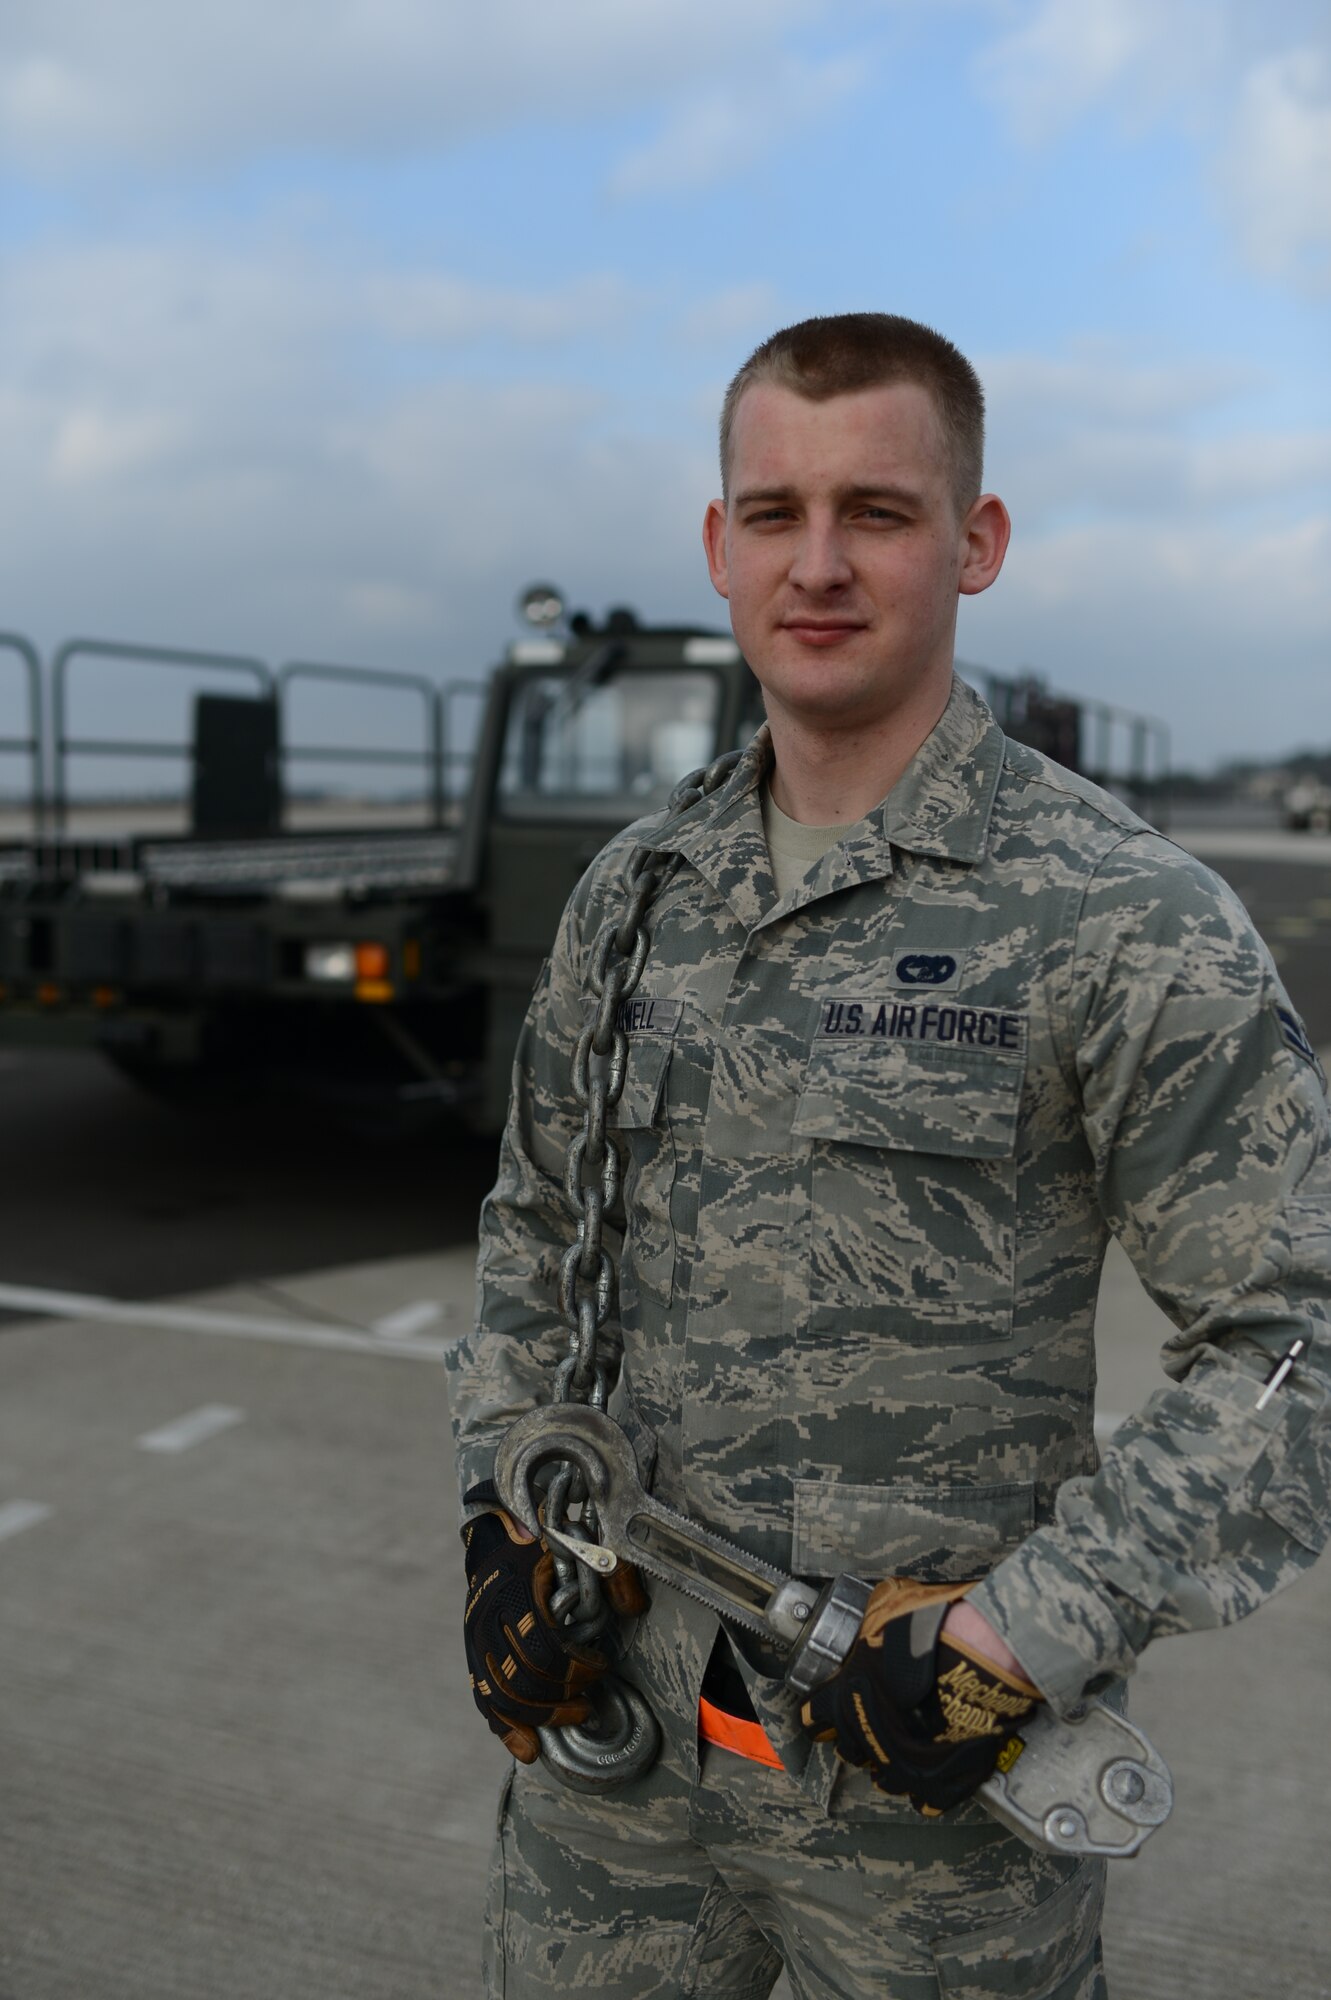 Airman 1st Class Trevor Caldwell, 726th Air Mobility Squadron, aircraft services specialist from Brandon, Fla. is the Super Saber Performer for the week of  March 31 - April 4, 2014. (U.S. Air Force photo by Senior Airman Gustavo Castillo/Released)
